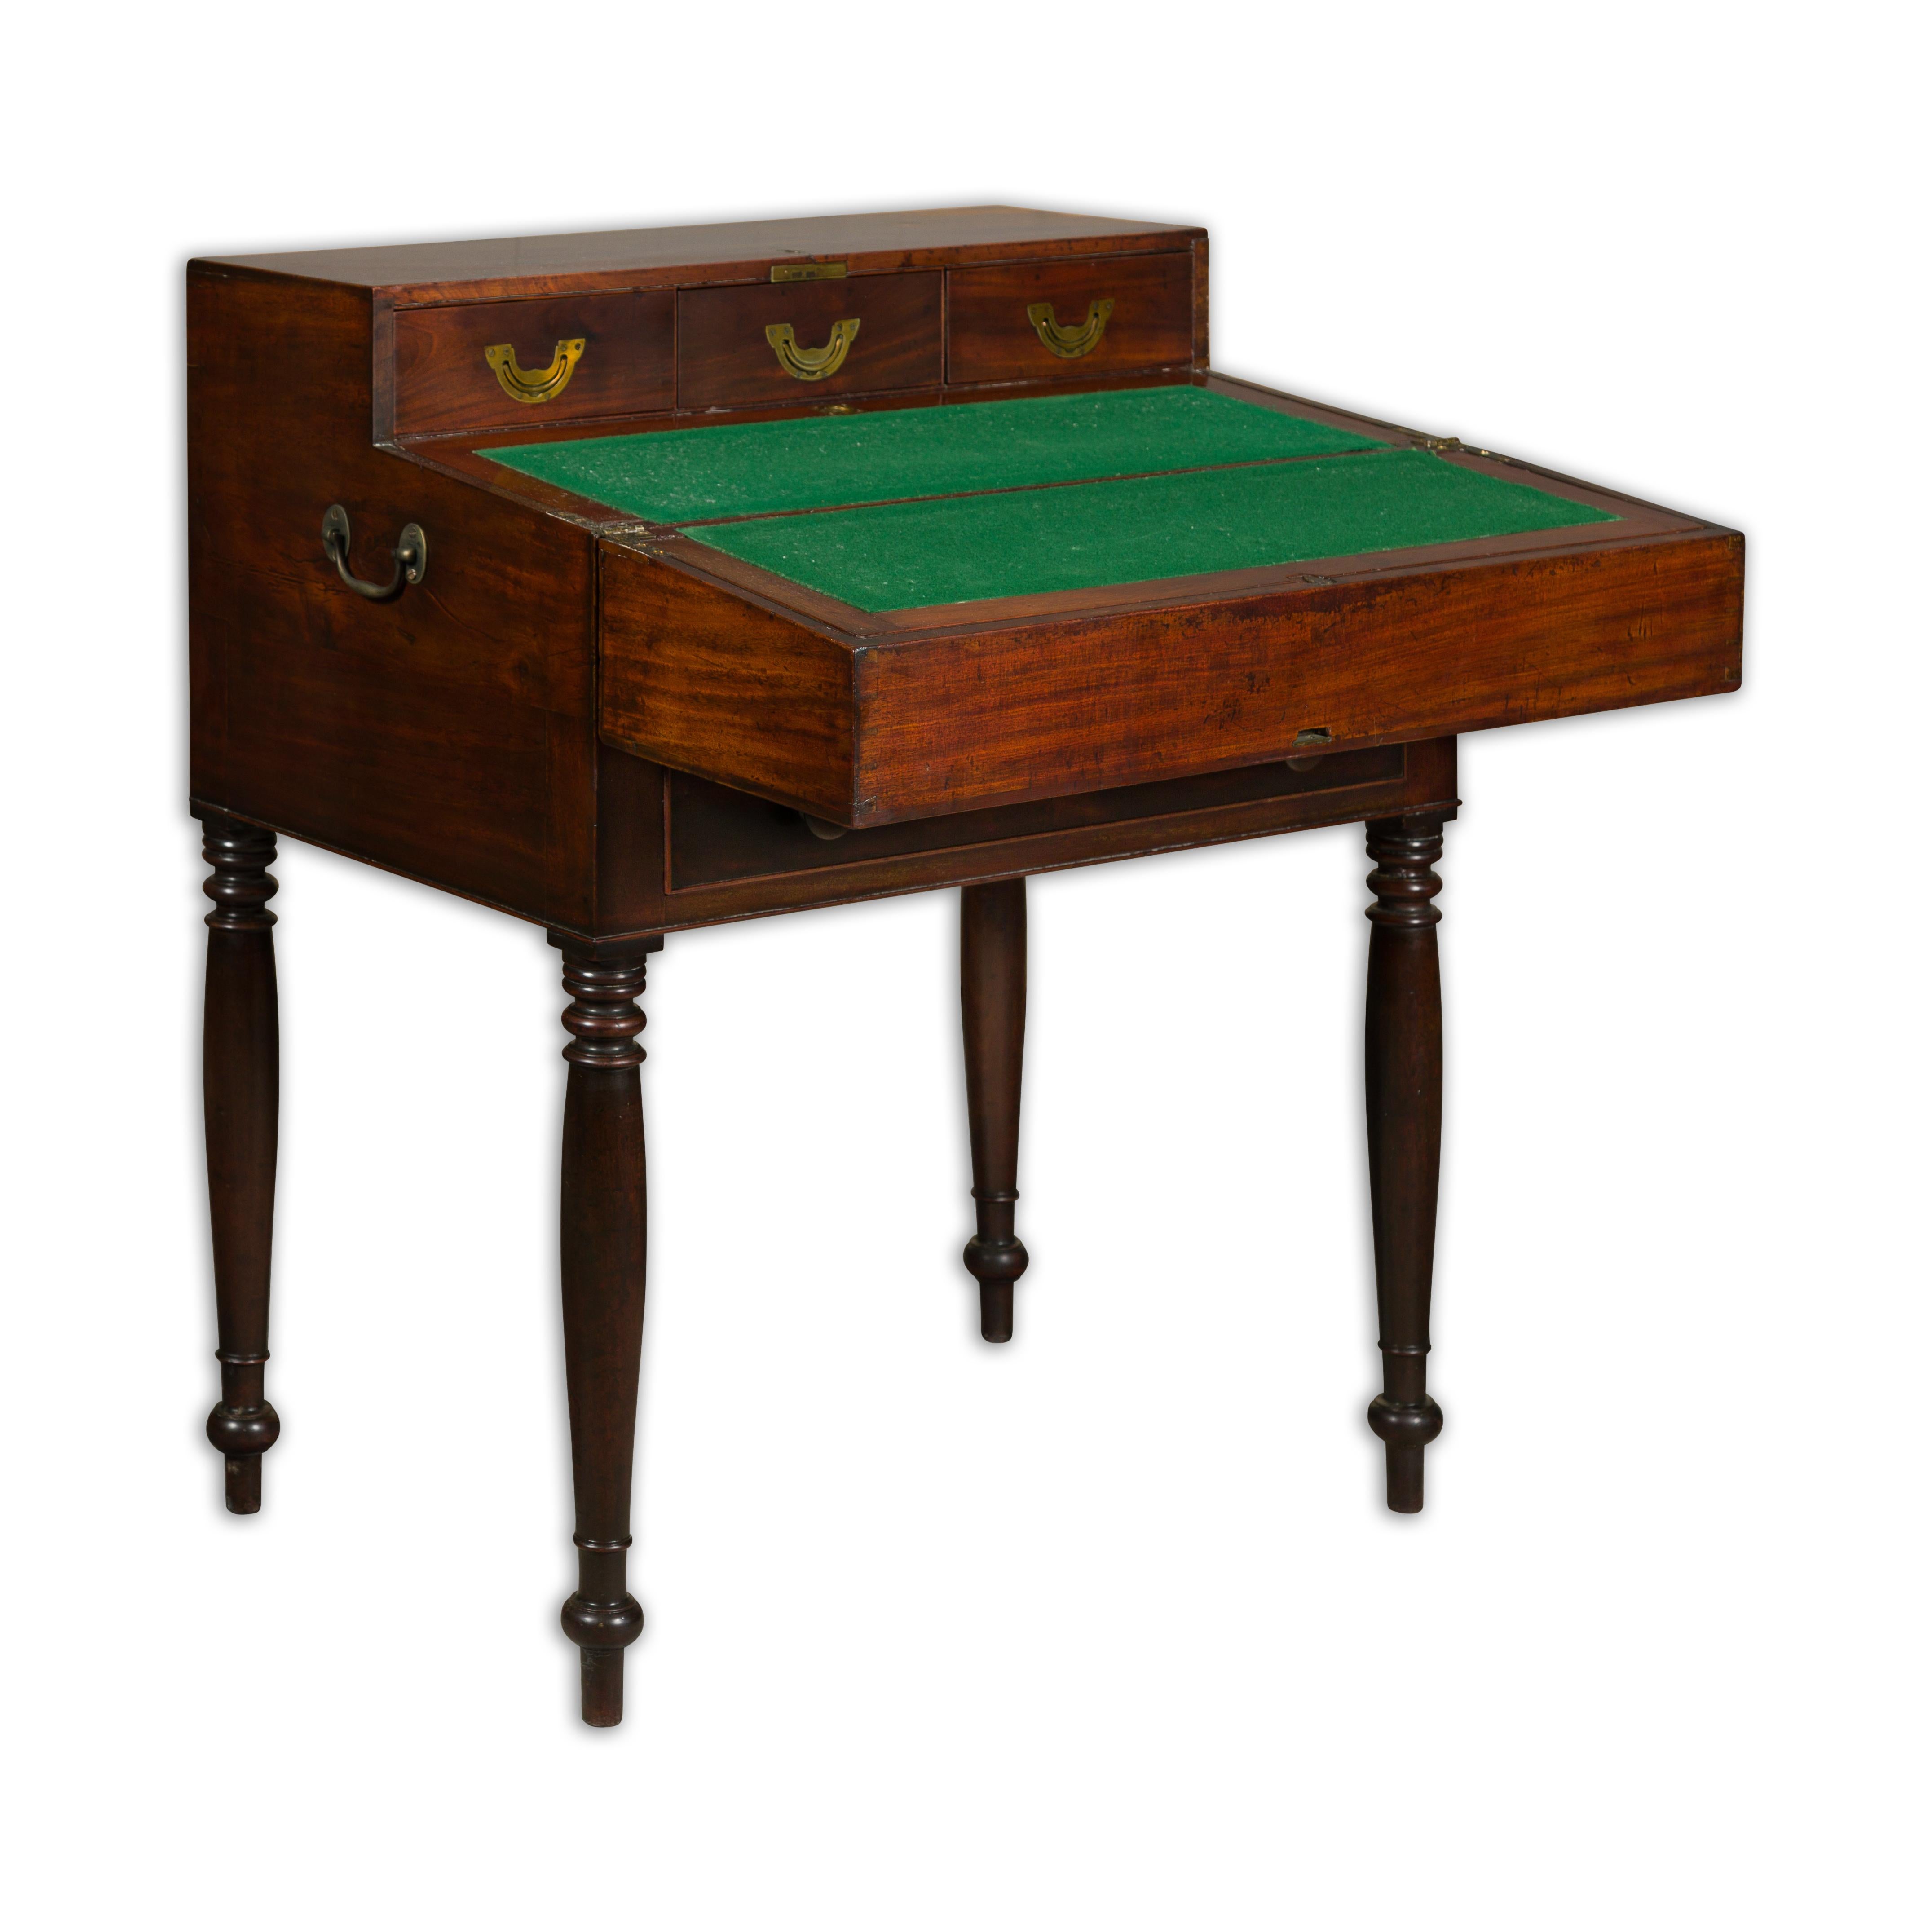 An English mahogany campaign period box on legs from the 19th century revealing a desk with drawers and green felt. This English mahogany campaign period box on legs from the 19th century is a captivating piece of functional artistry. Crafted with